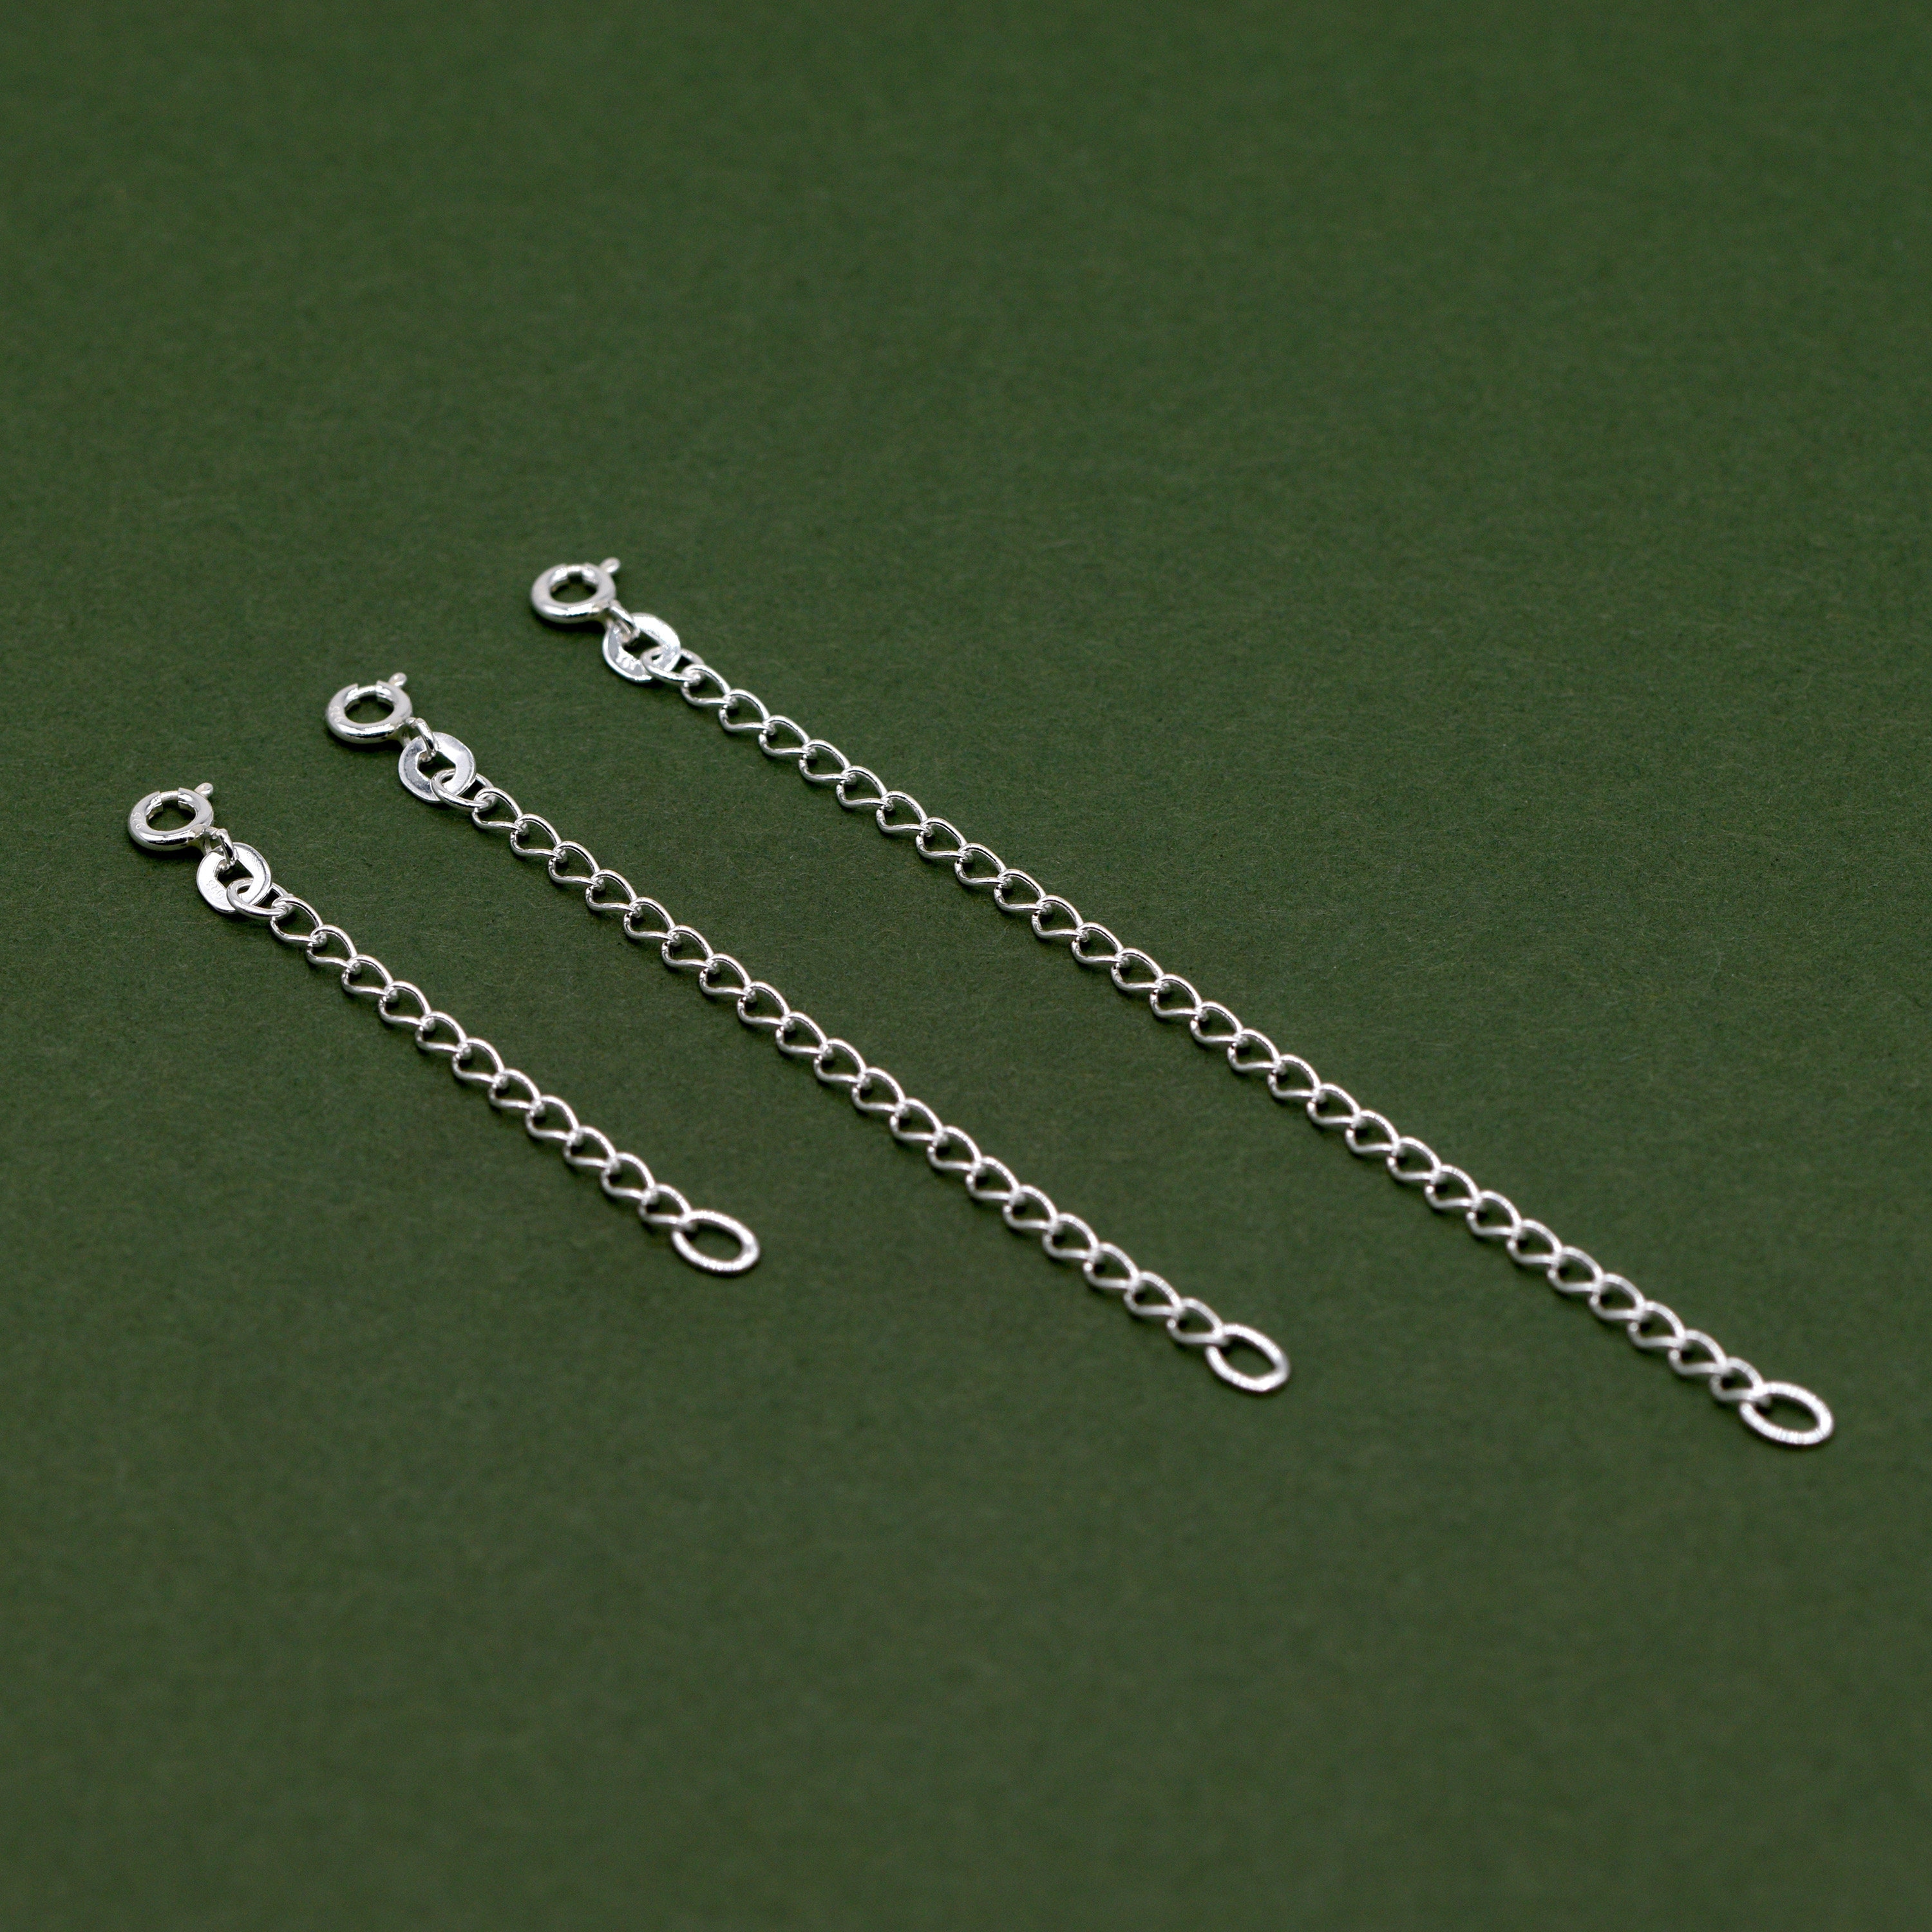 1 - 2 Inch Sterling Silver Necklace Extender Chain, 4mm Jump Ring,  Extension Chain, Silver Extender, Findings, KP14-10